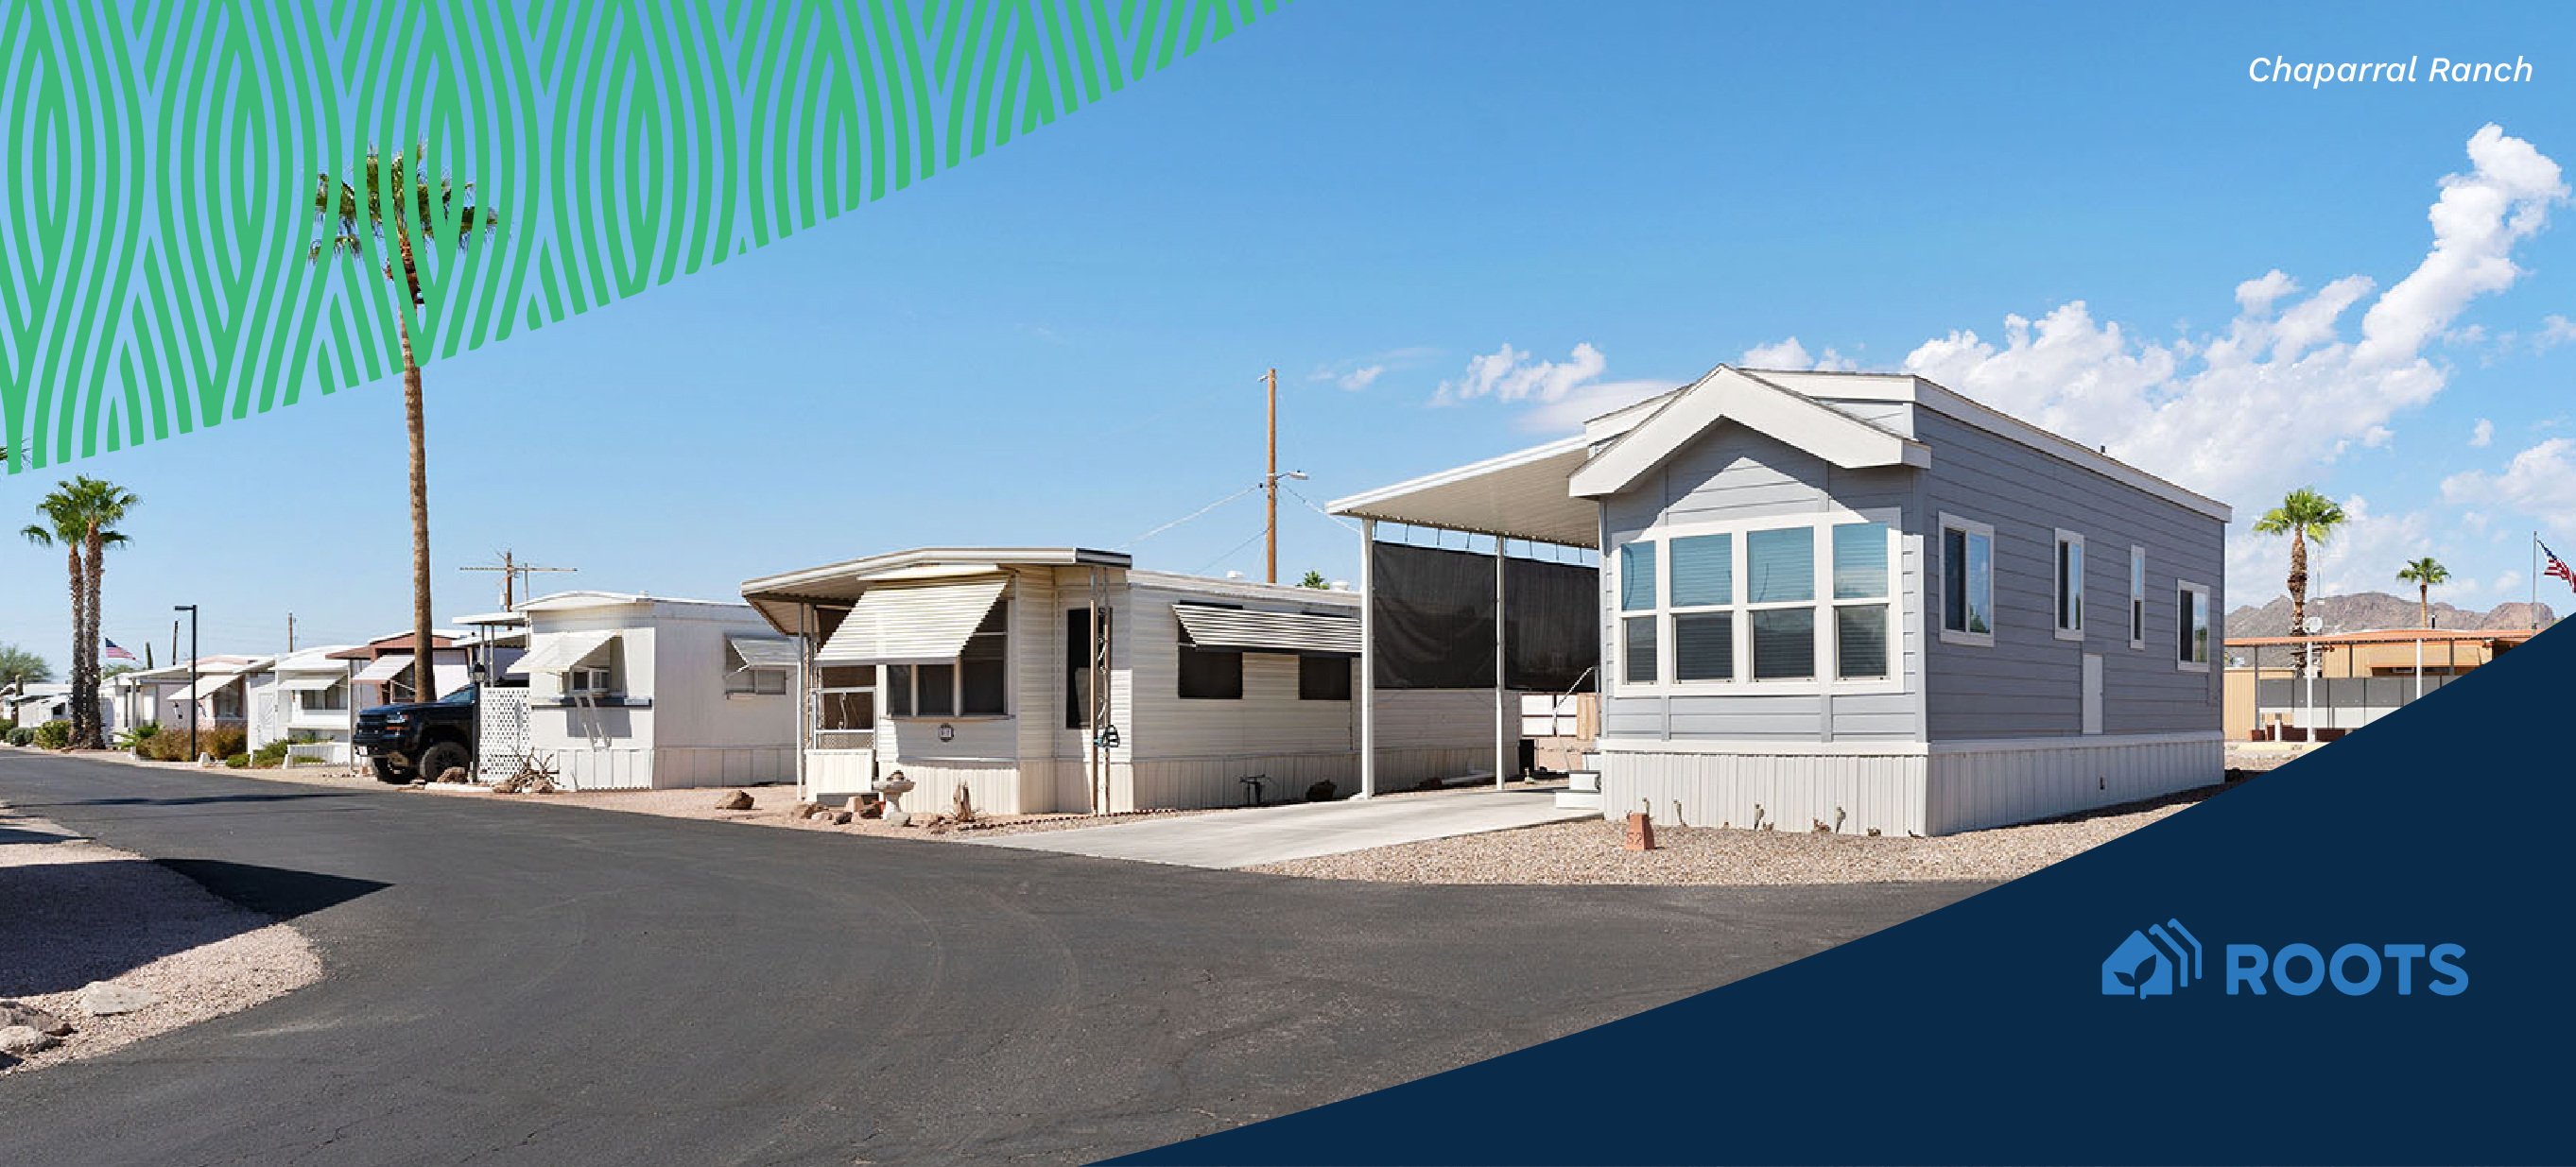 Trusted to Transform: Pioneering Change in Manufactured Housing with Roots